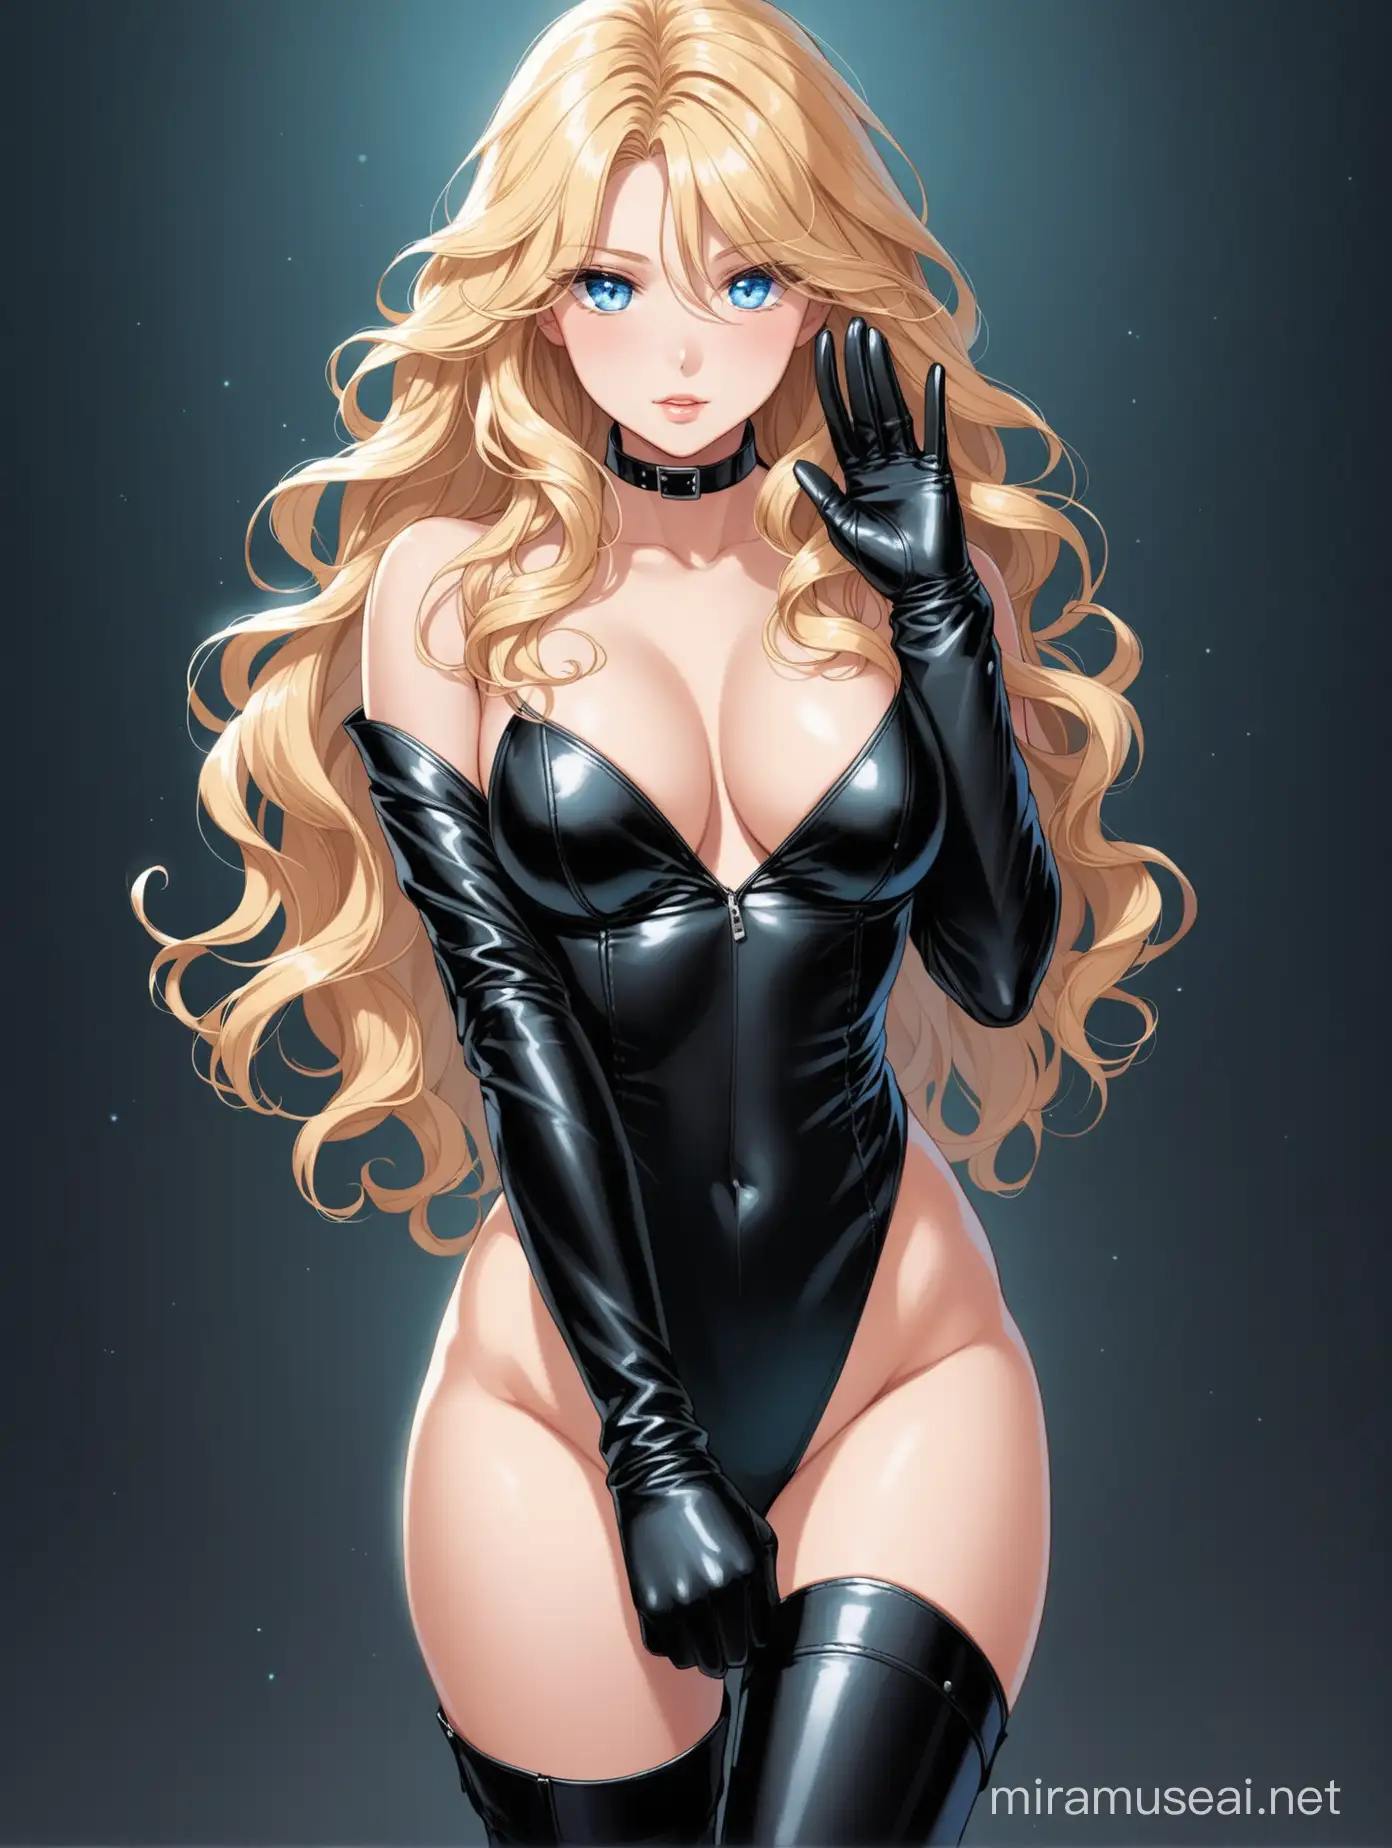 Sensual Blonde Woman in Black Leather Gloves and Boots